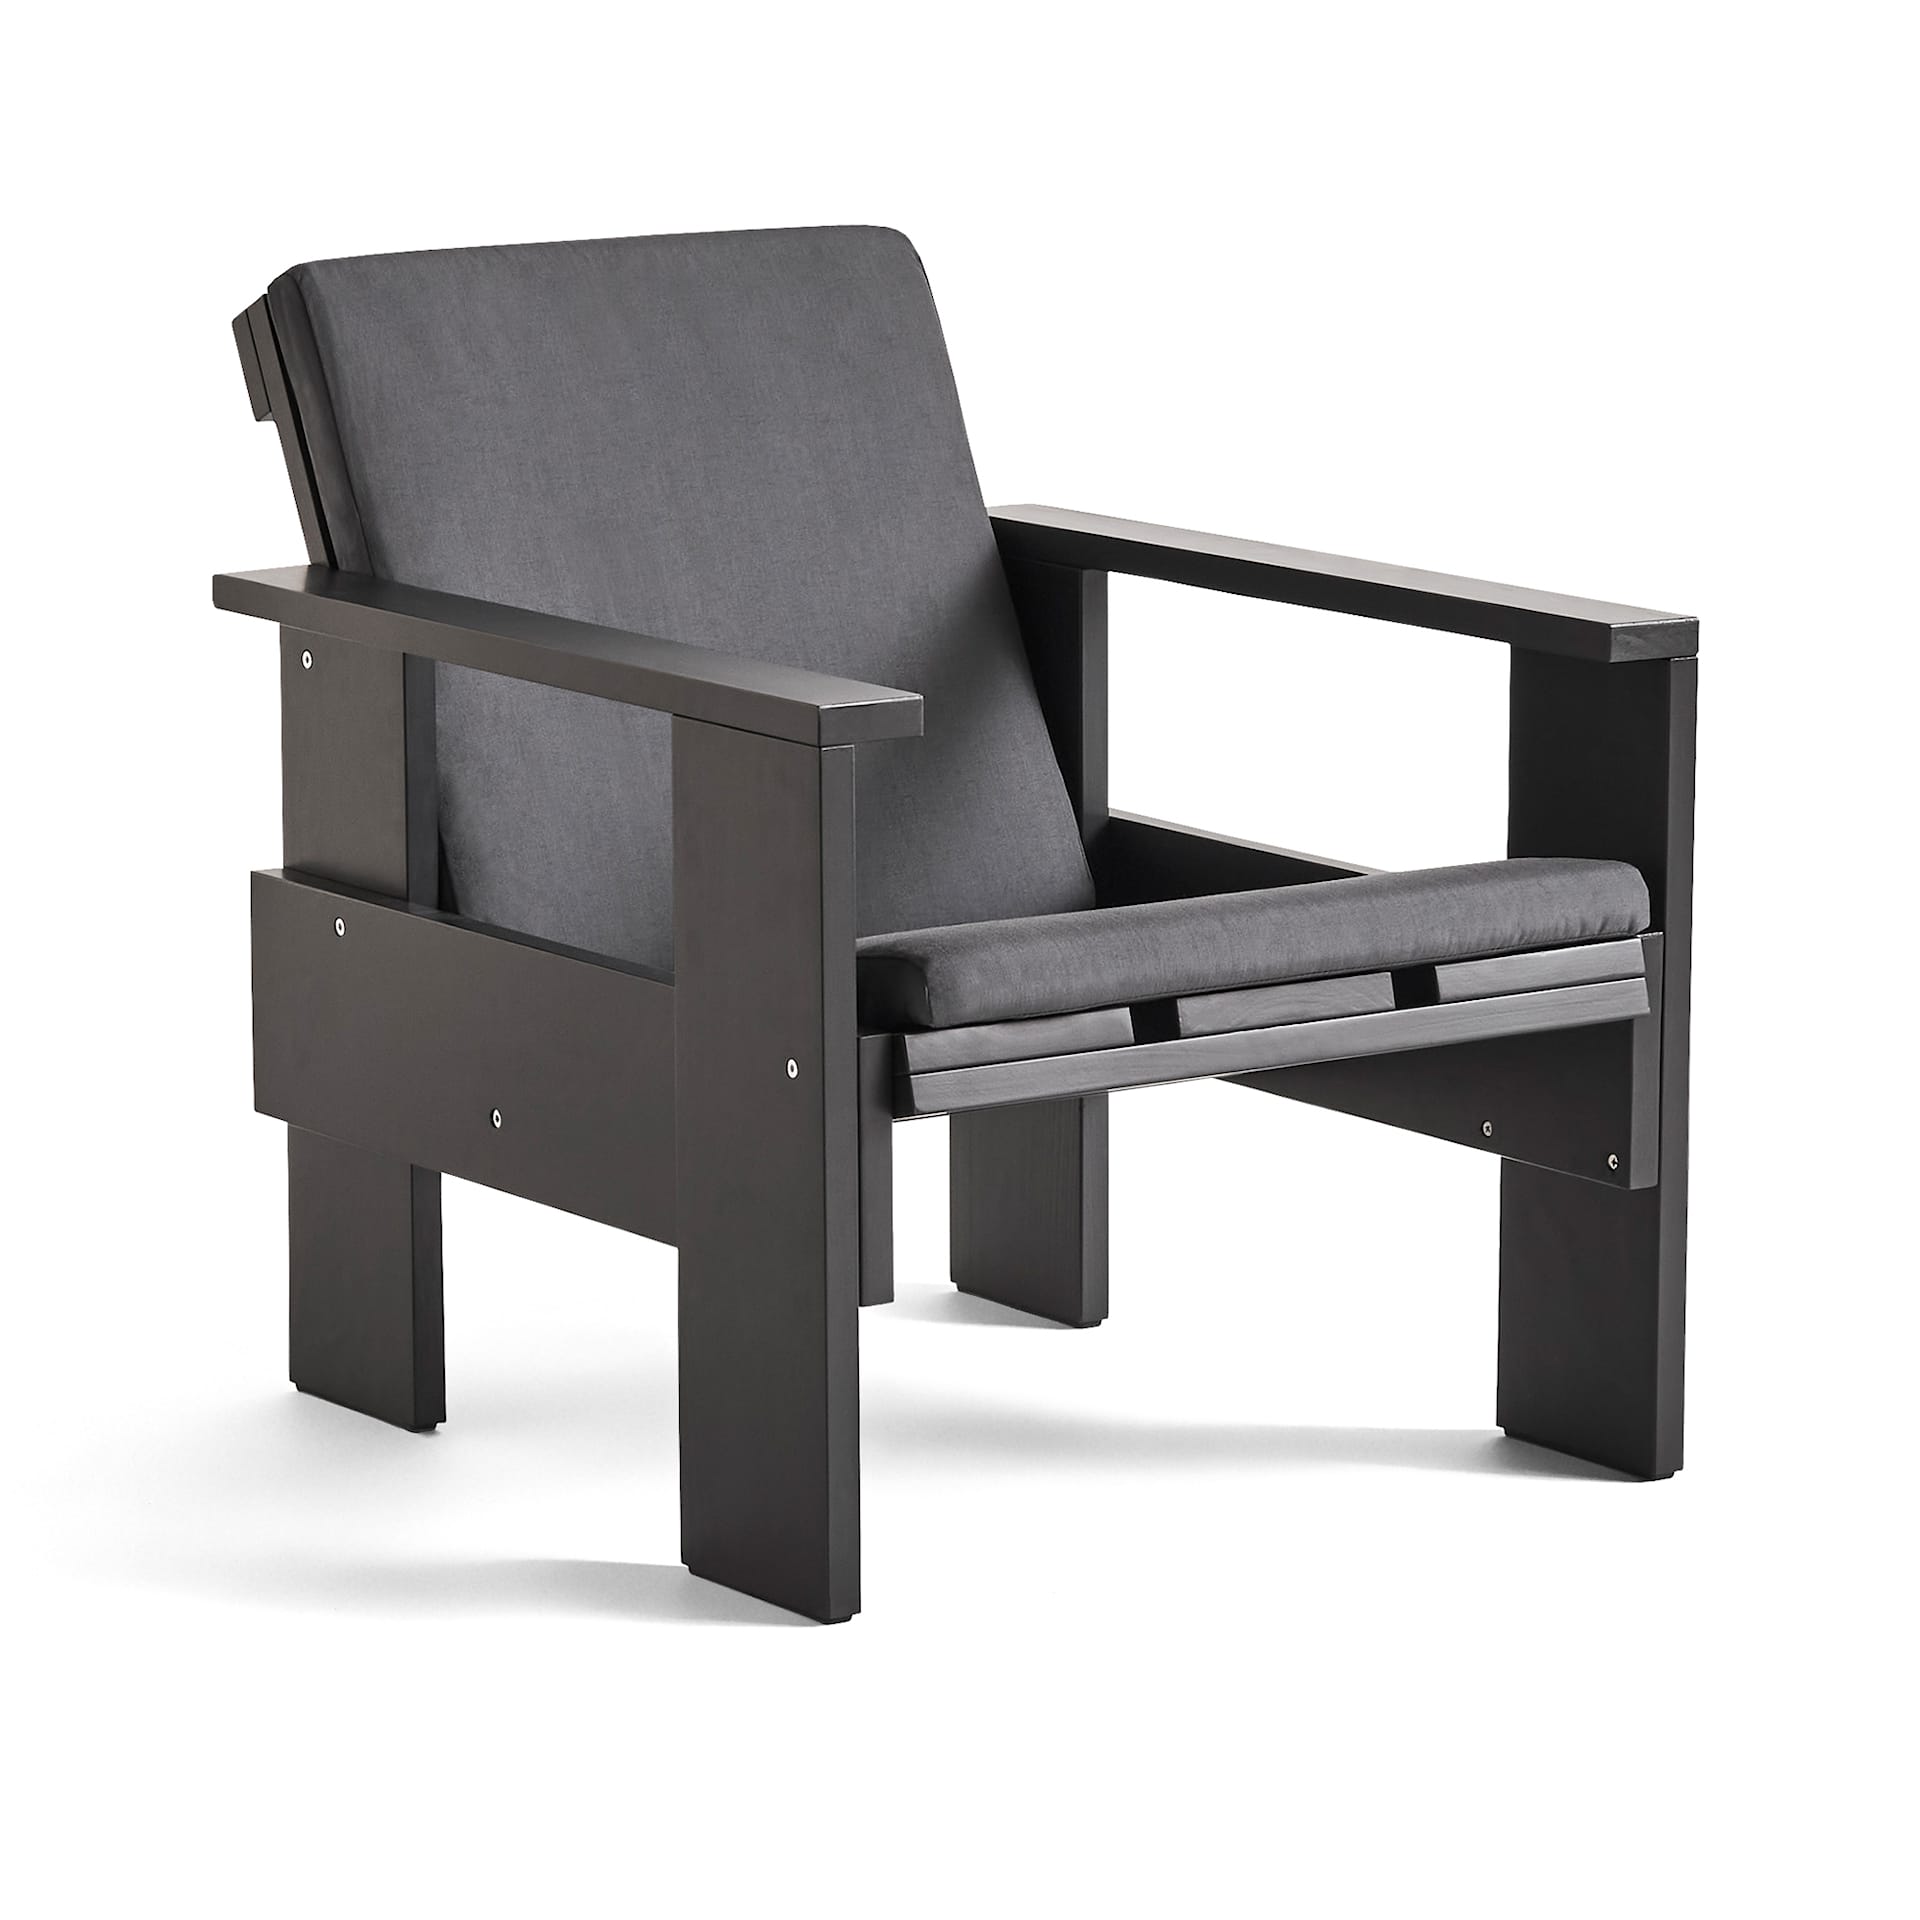 Folding Cushion for Crate Lounge Chair - HAY - Gerrit Rietveld - NO GA